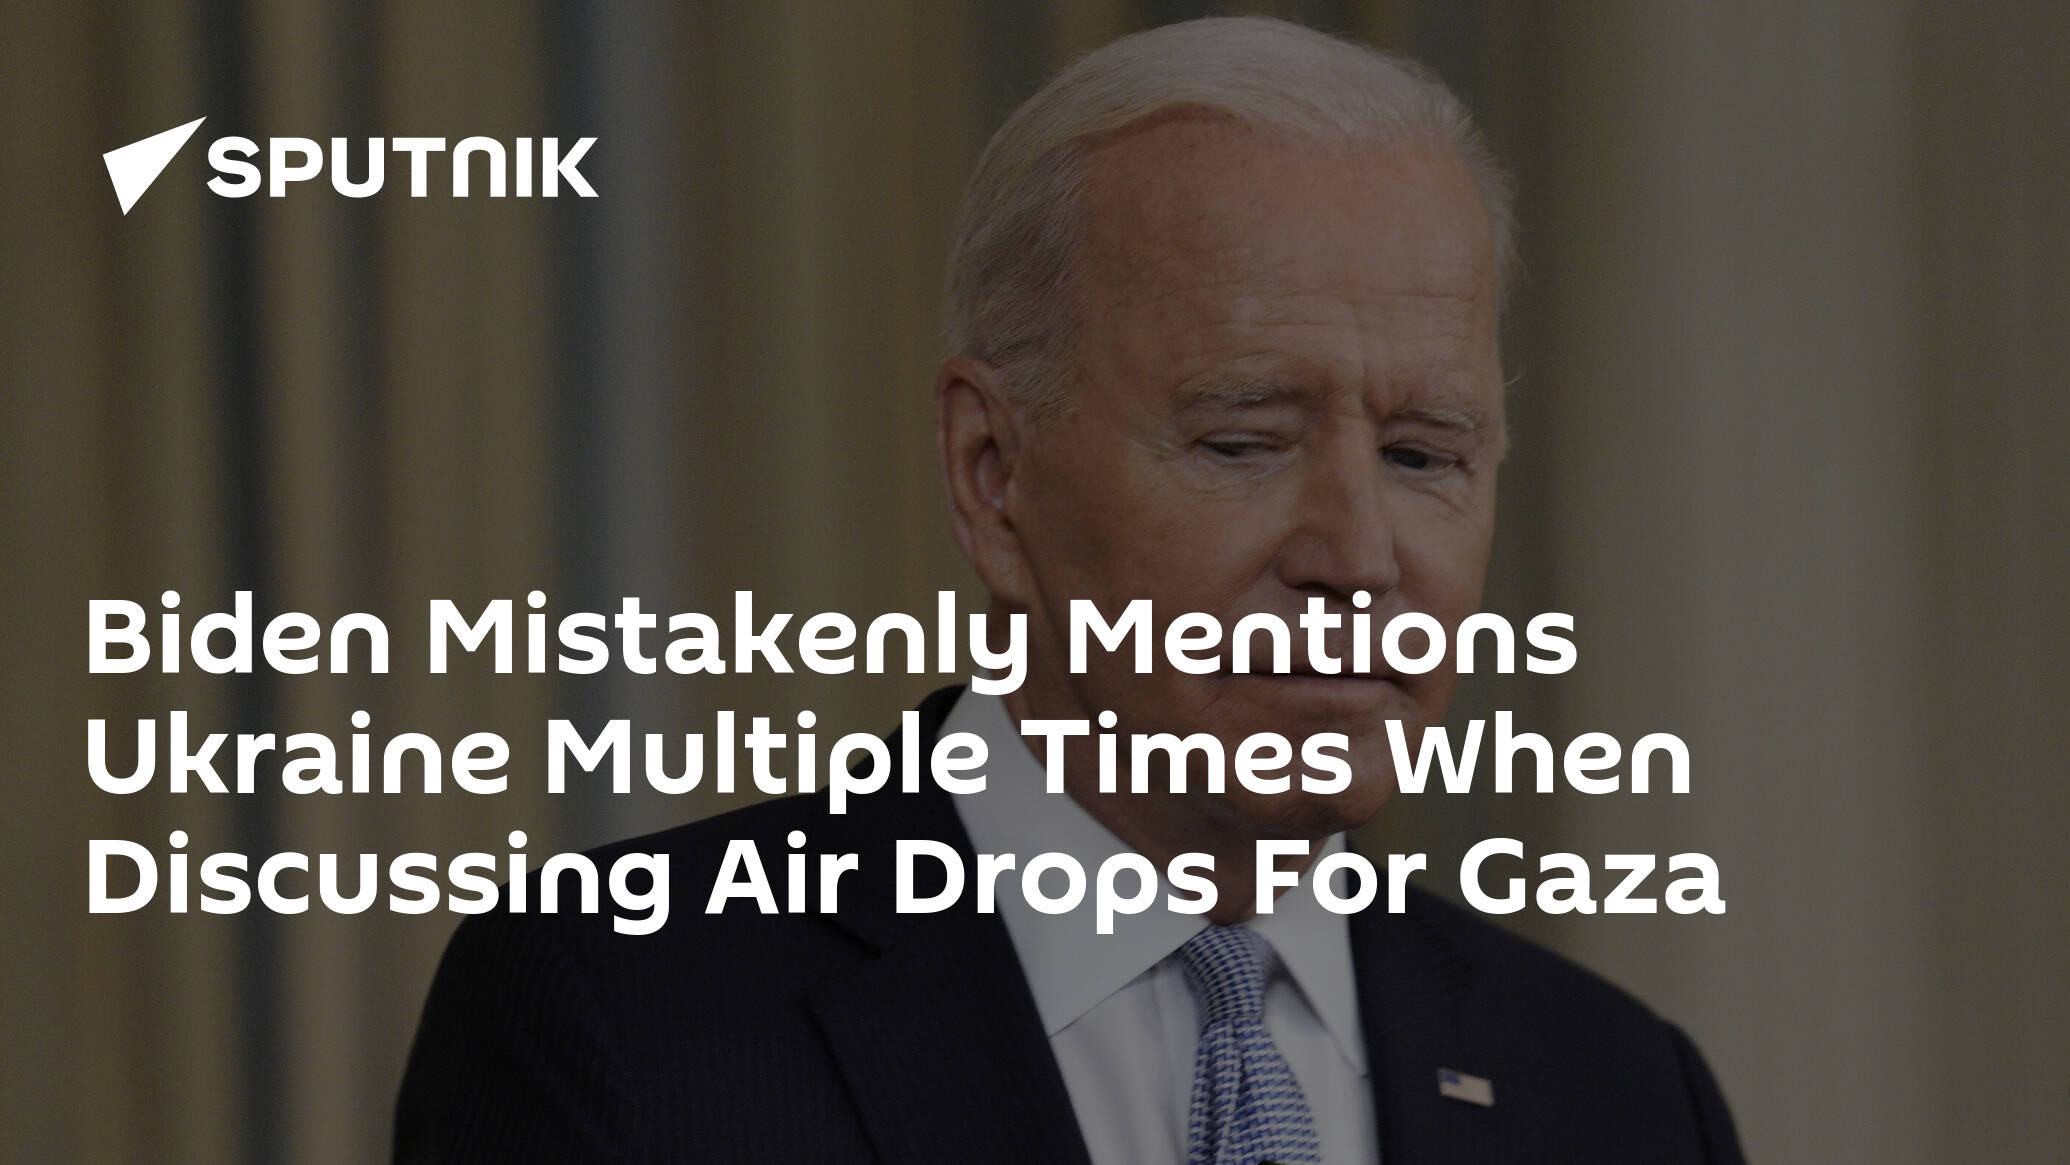 Biden Mistakenly Mentions Ukraine Multiple Times When Discussing Air Drops For Gaza